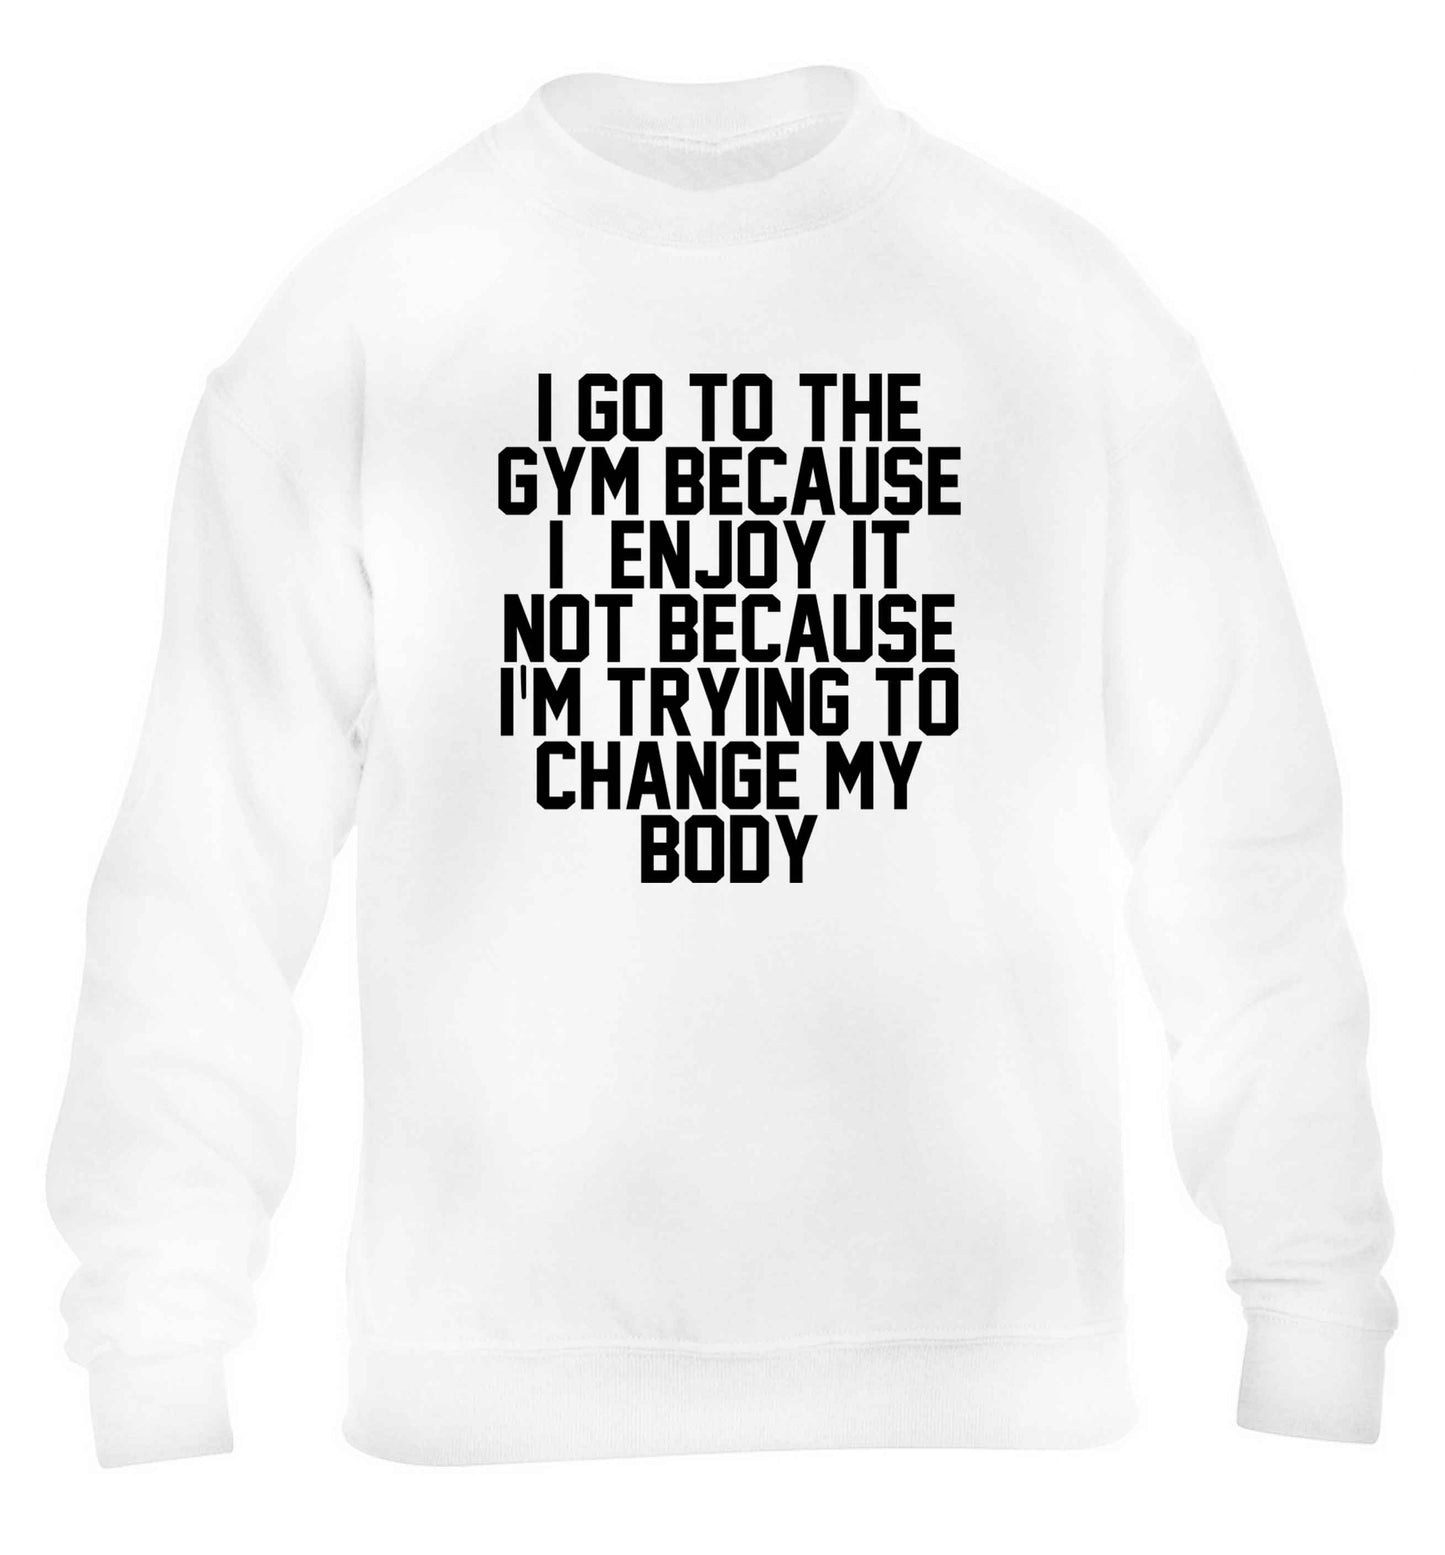 I go to the gym because I enjoy it not because I'm trying to change my body children's white sweater 12-13 Years